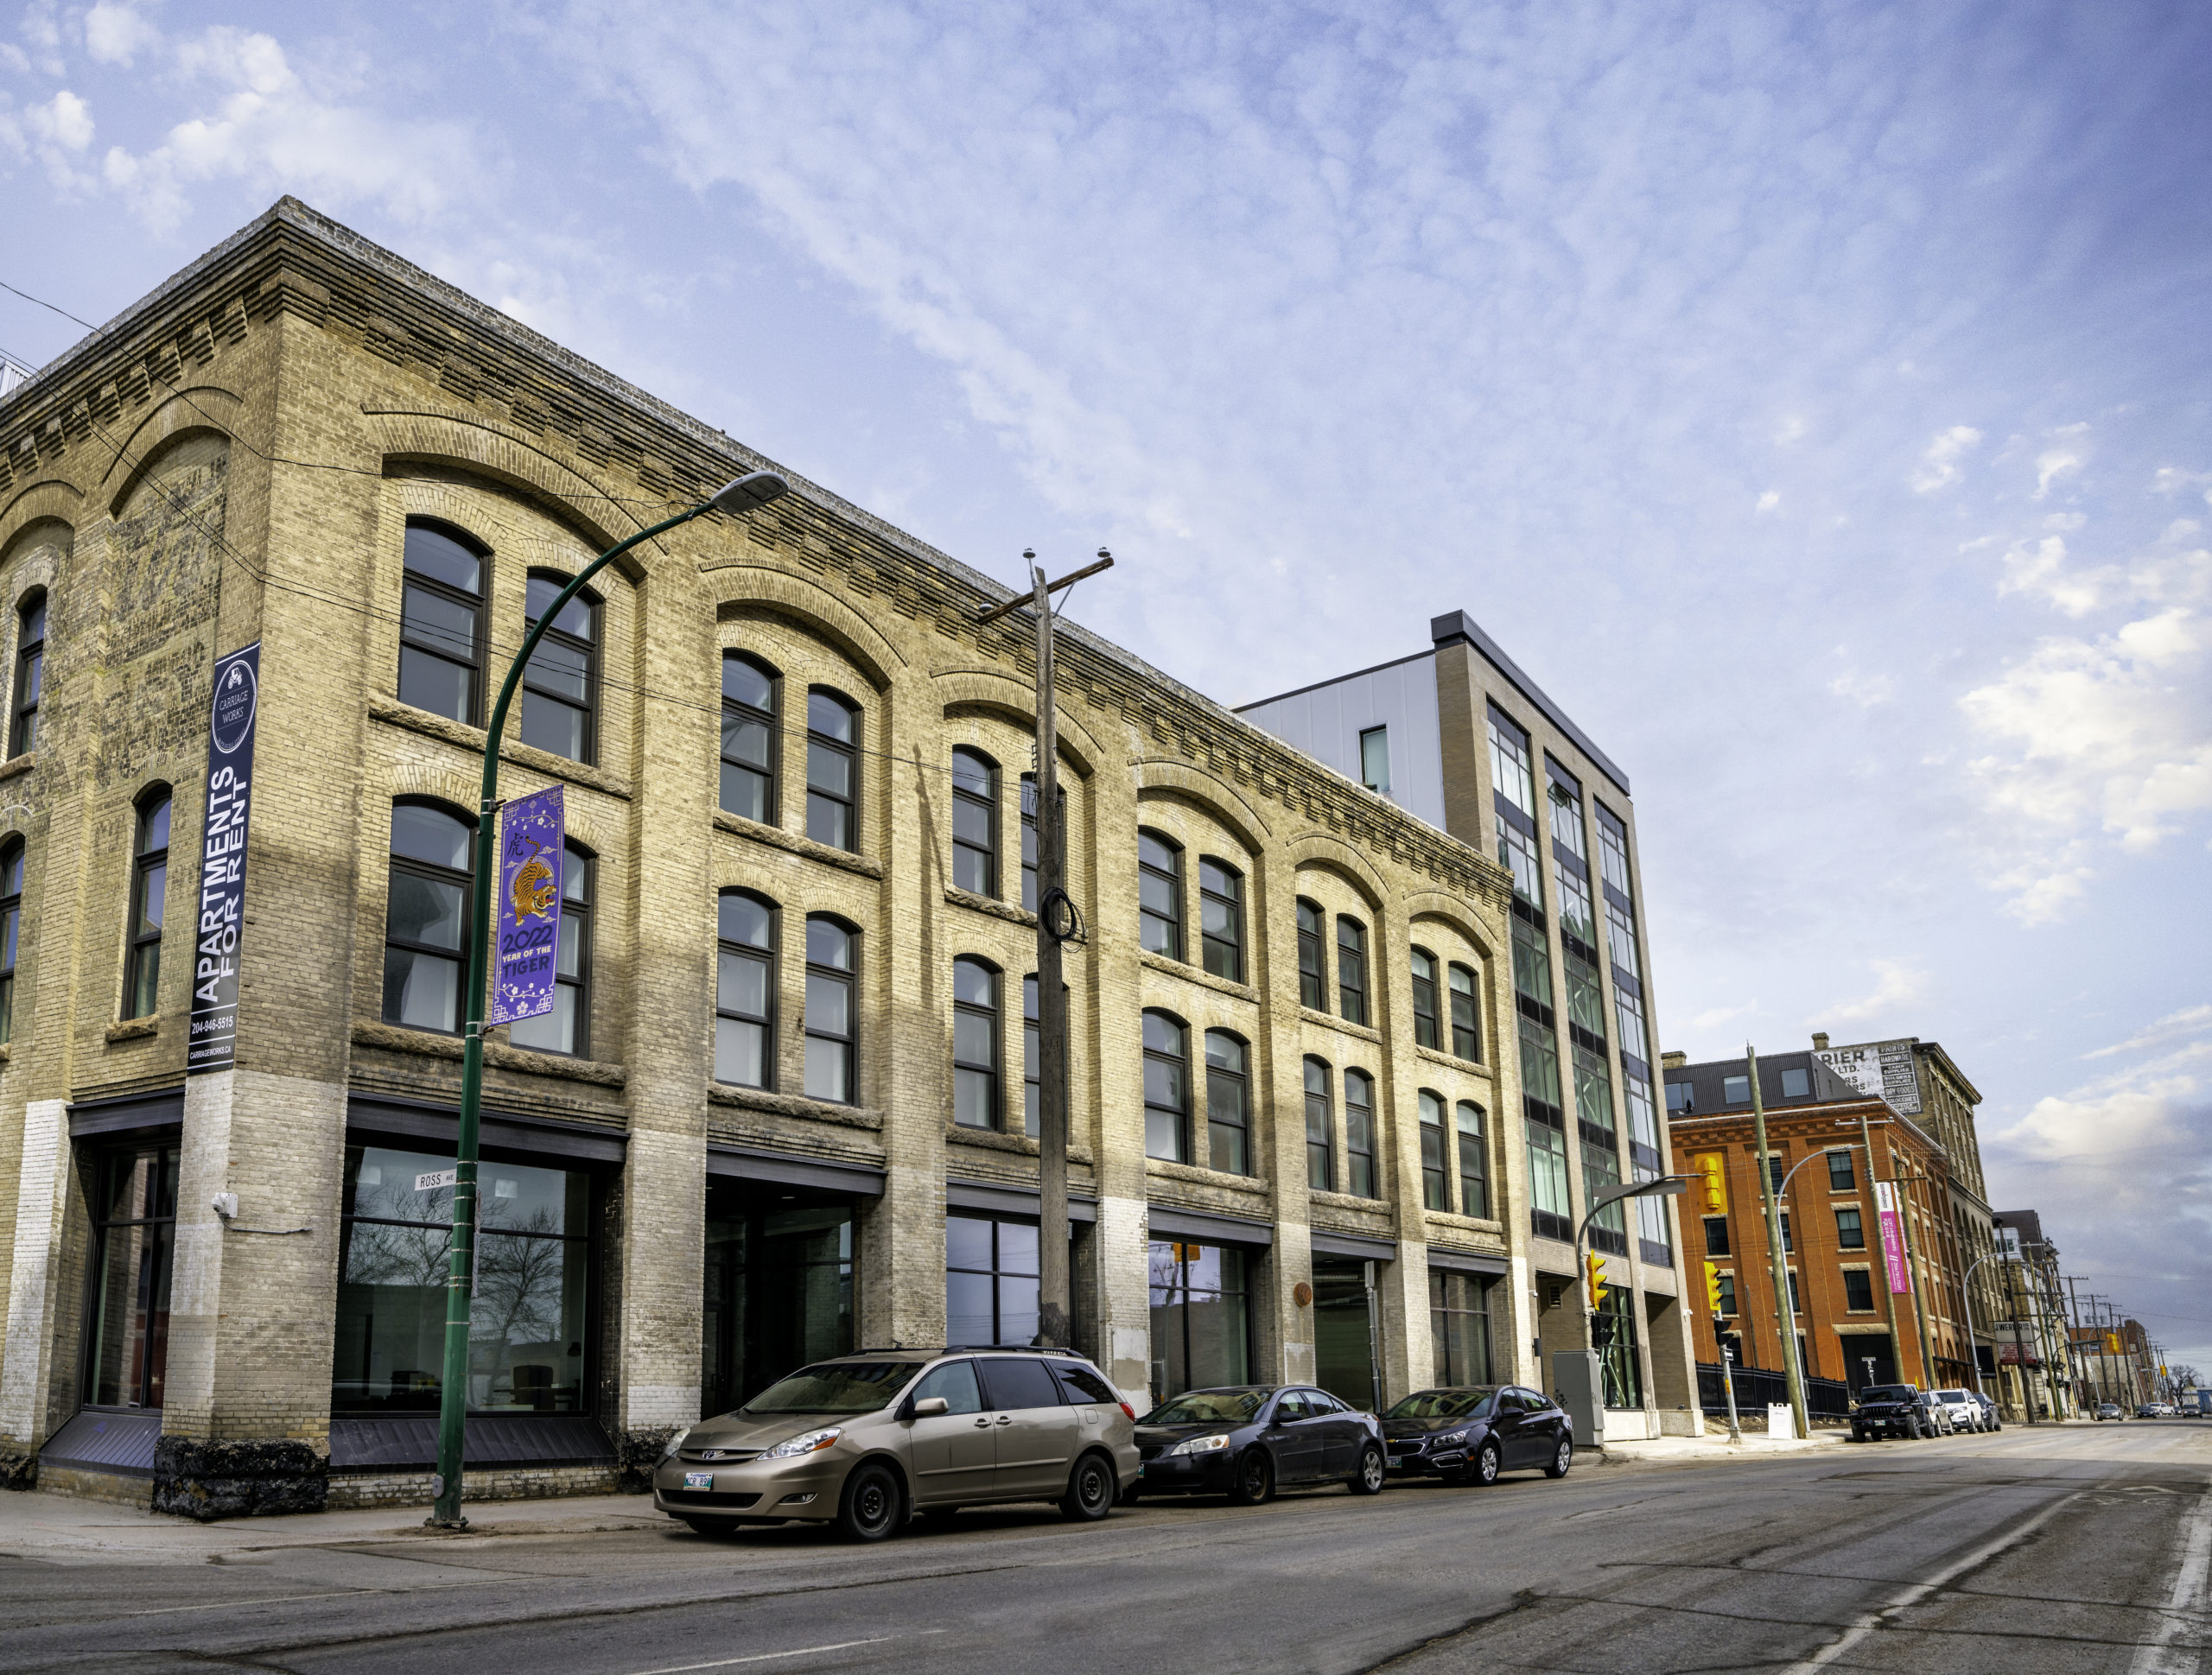 A view of the block on which the gallery is located. The building is made of brick with large windows on the main floor. There is a tall modern building at the end with many windows. 3 cars are parked in front of the building. The sun is shining. 